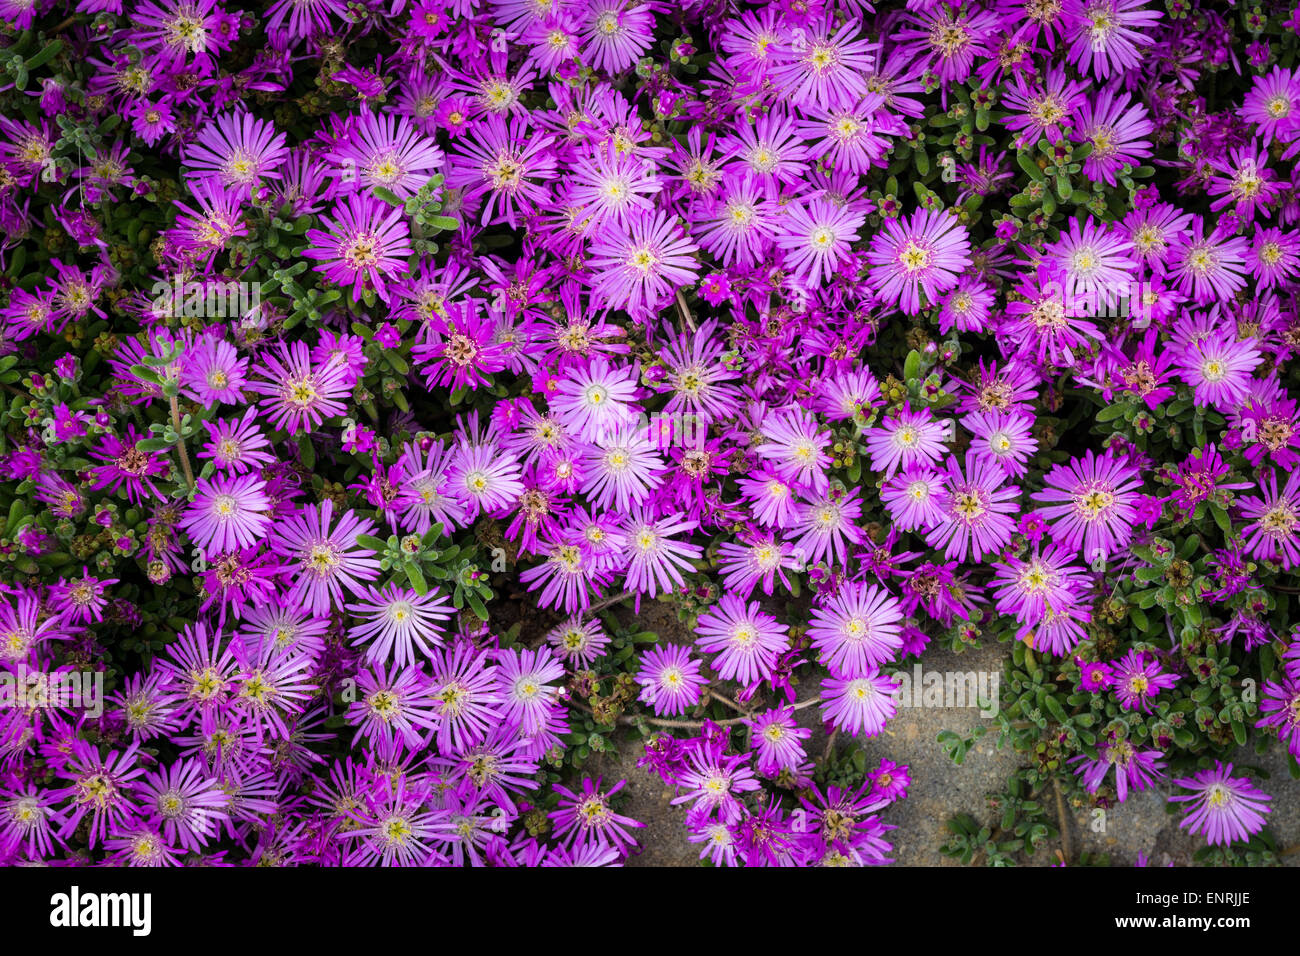 Lampranthus Spectabilis or trailing ice plant in flower. Stock Photo